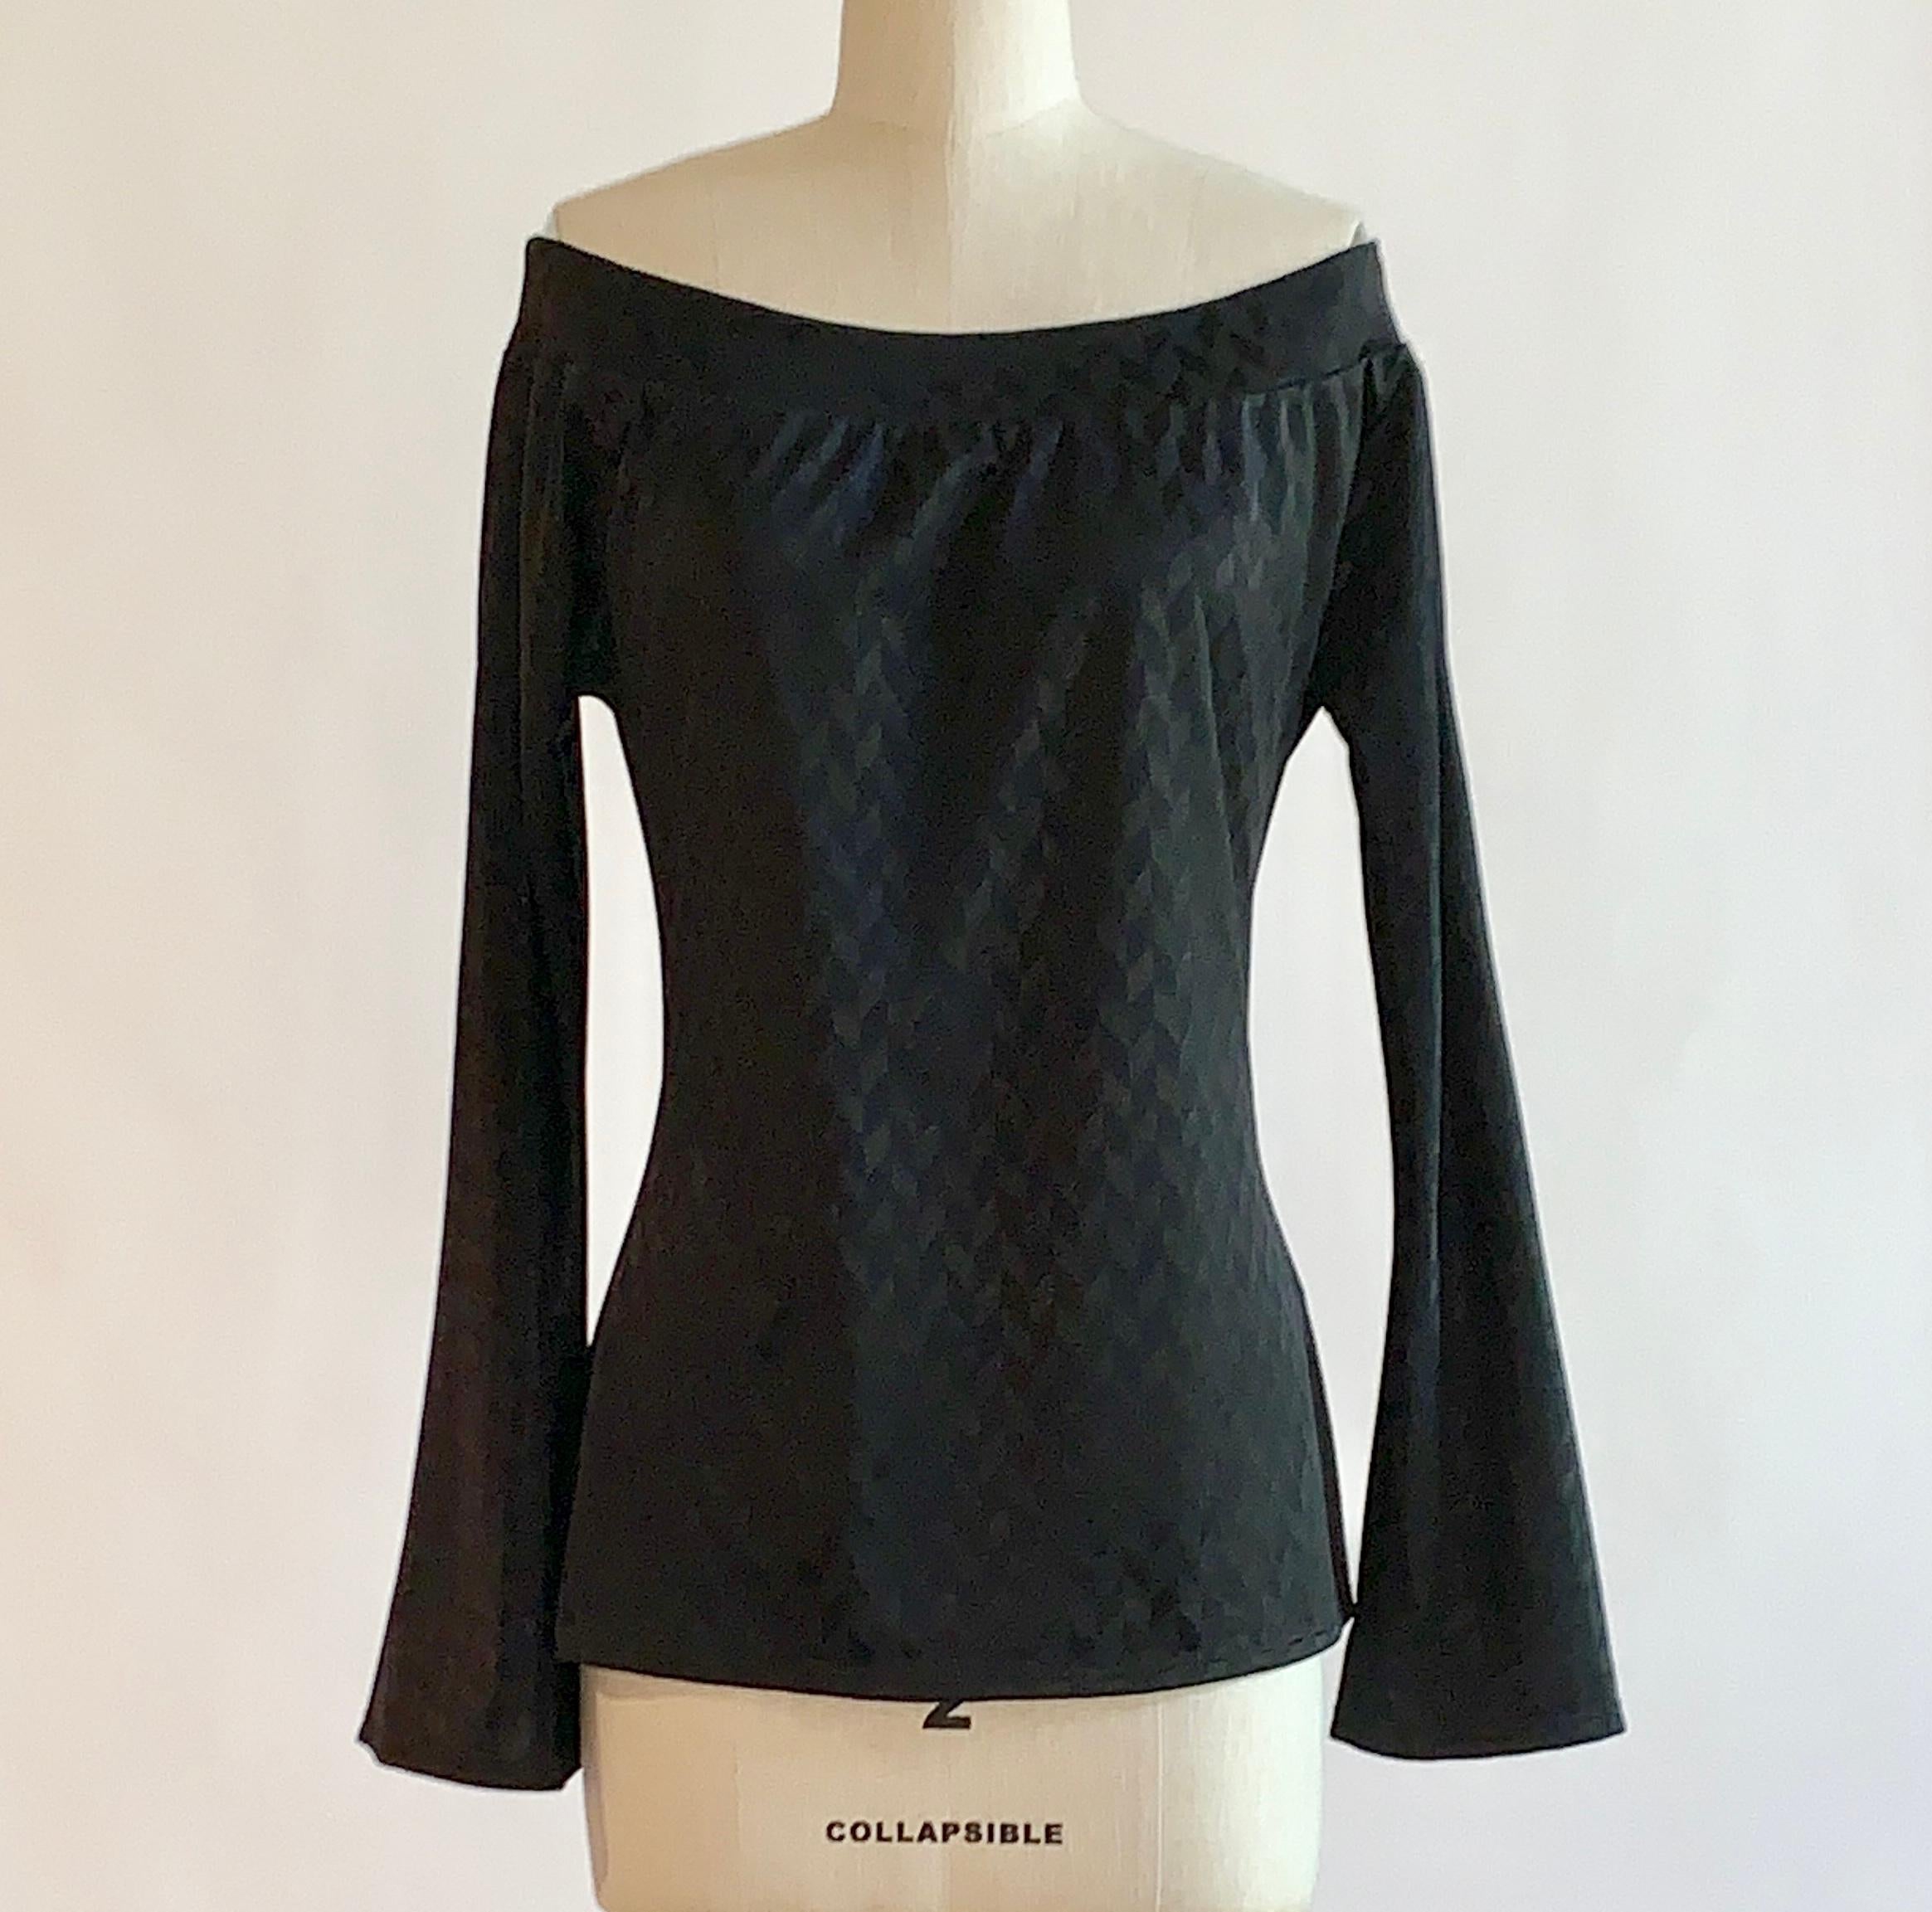 Alexander McQueen black chevron pattern off the shoulder long sleeve top with long bell sleeves. No closure, pulls on.

Seen on the Spring 2000 runway in red, look 56.

100% polyethylene. 

Made in Italy.

Labelled size IT 46, usually US 10, but